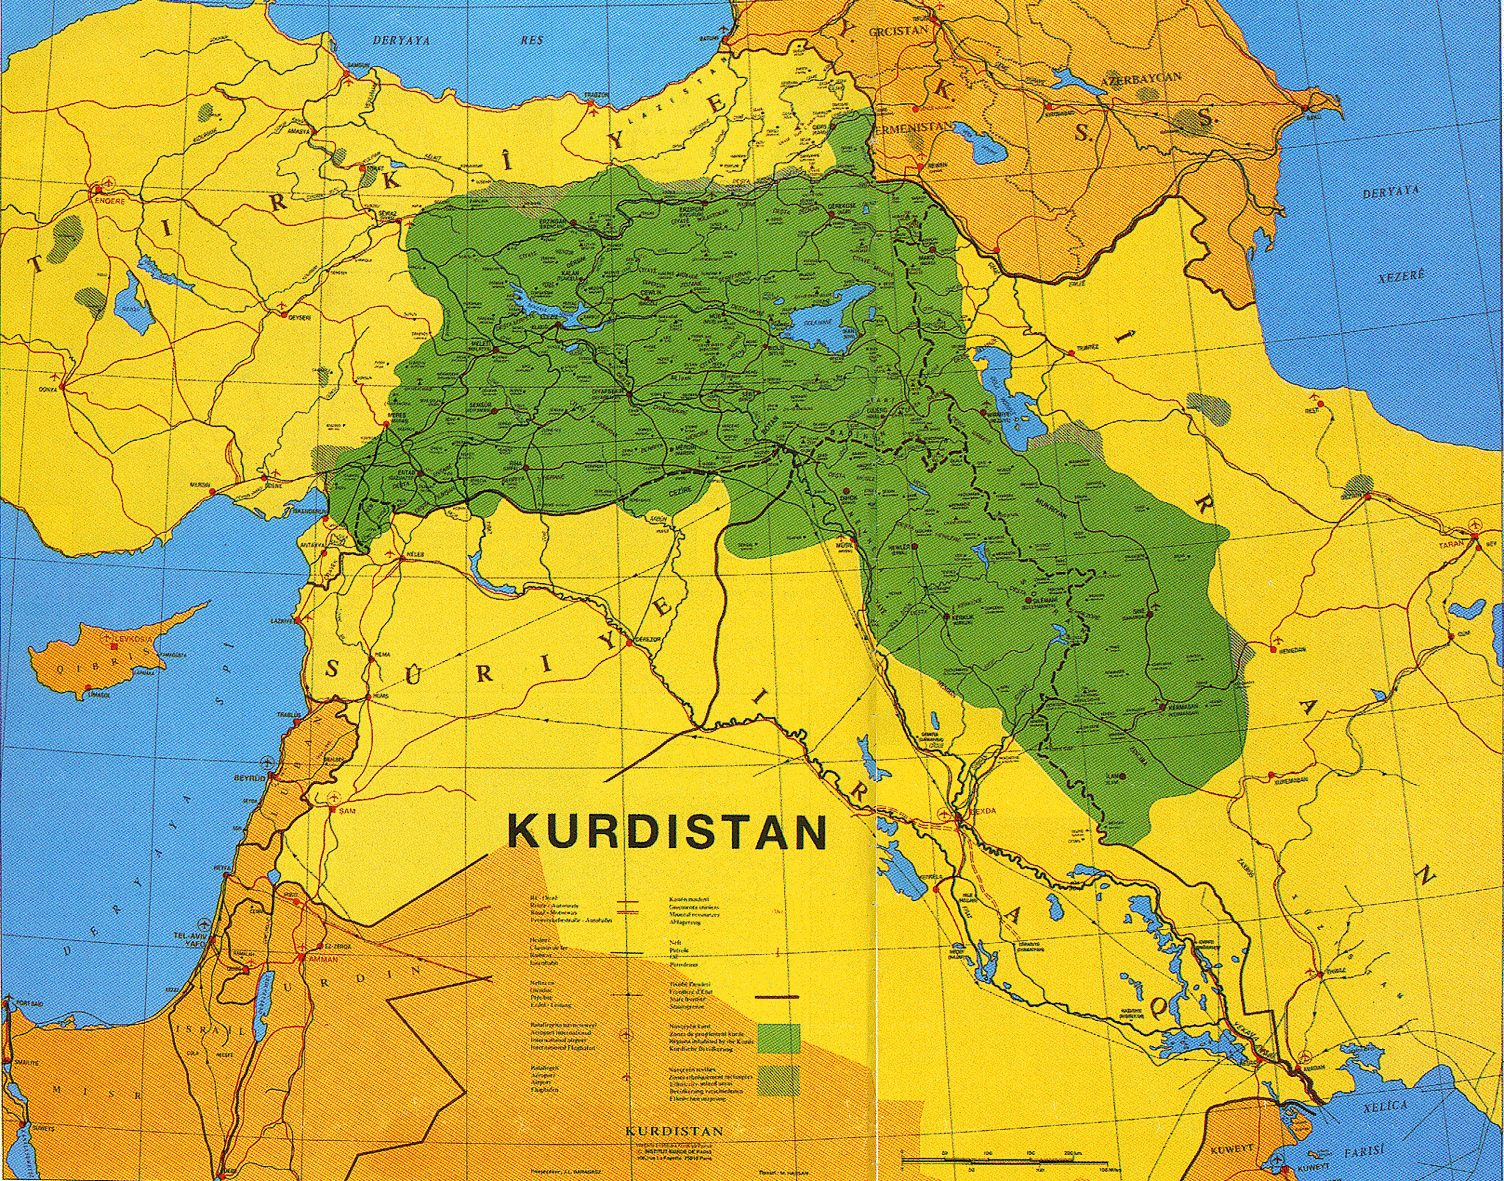 http://www.institutkurde.org/images/cartes_and_maps/ckur100.gif